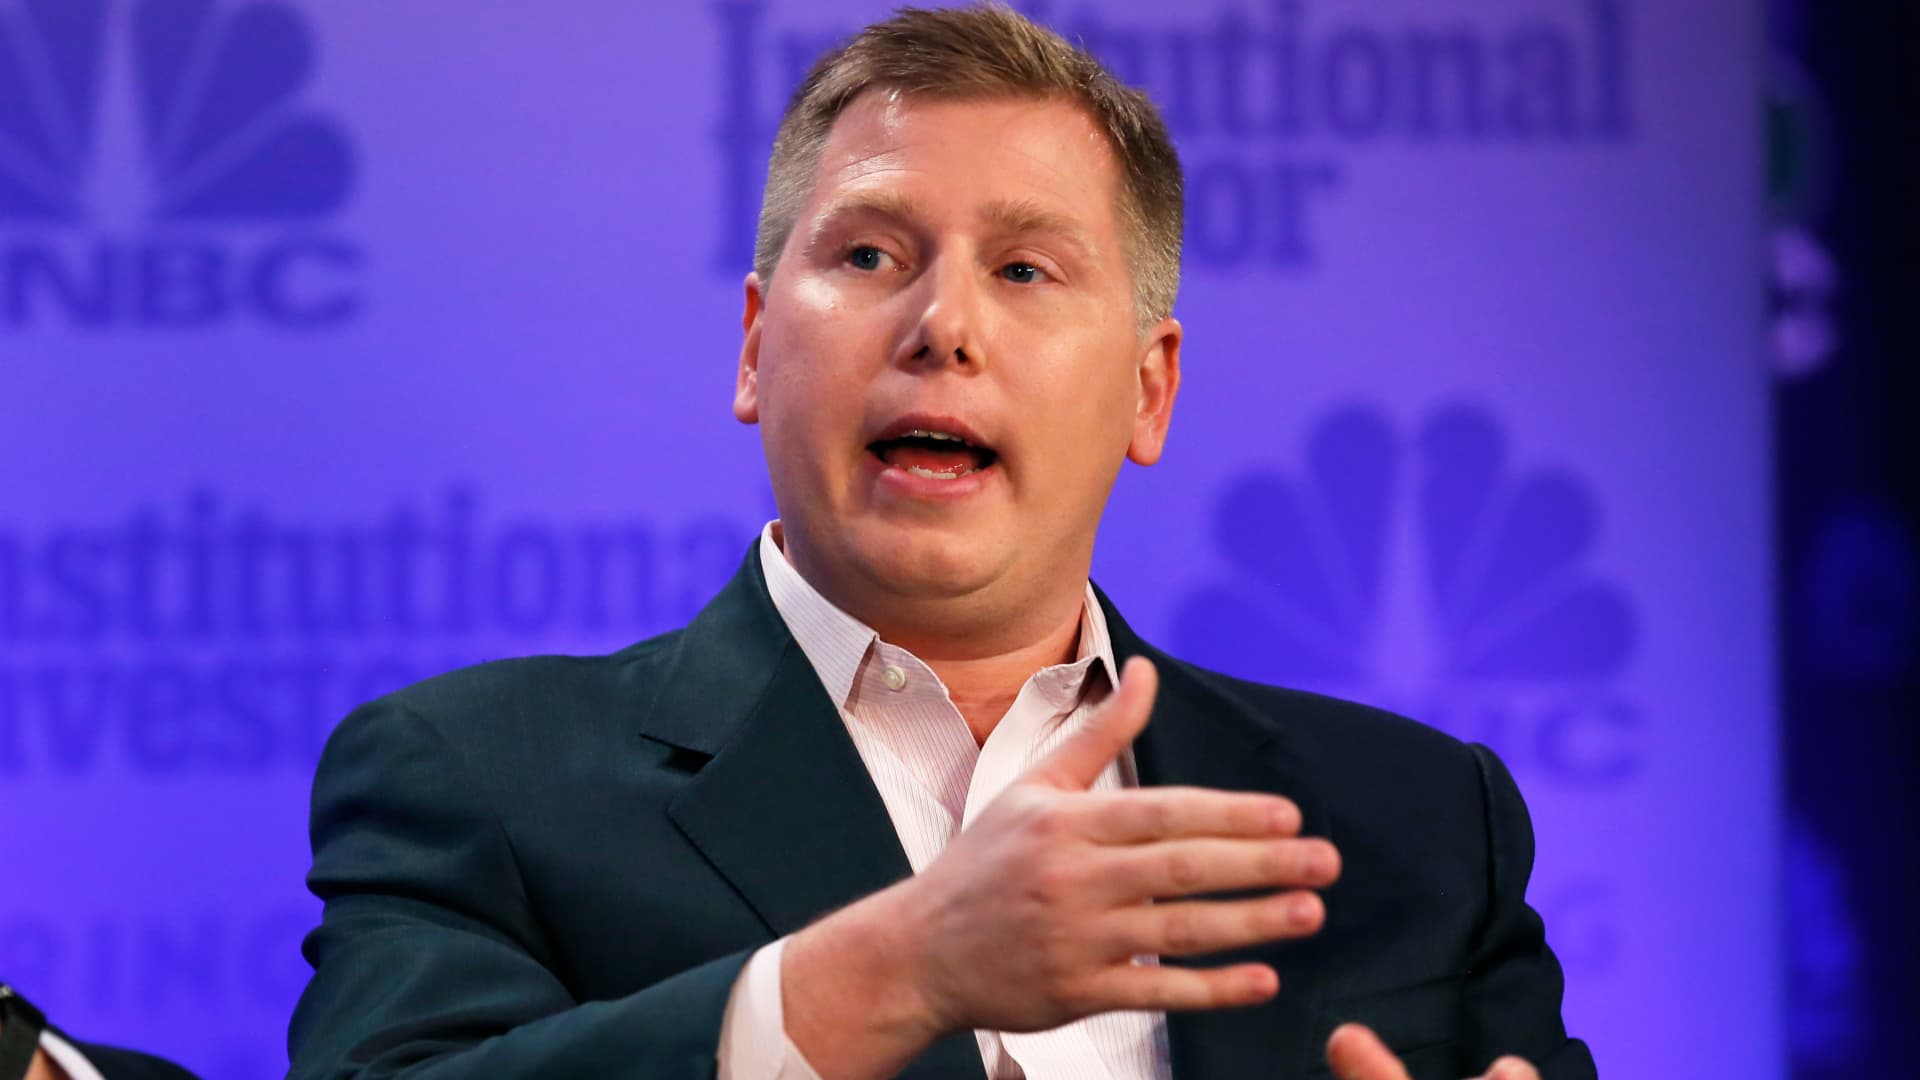 DCG’s Barry Silbert reveals crypto company has  billion in financial debt as he tries to quiet investors soon after FTX